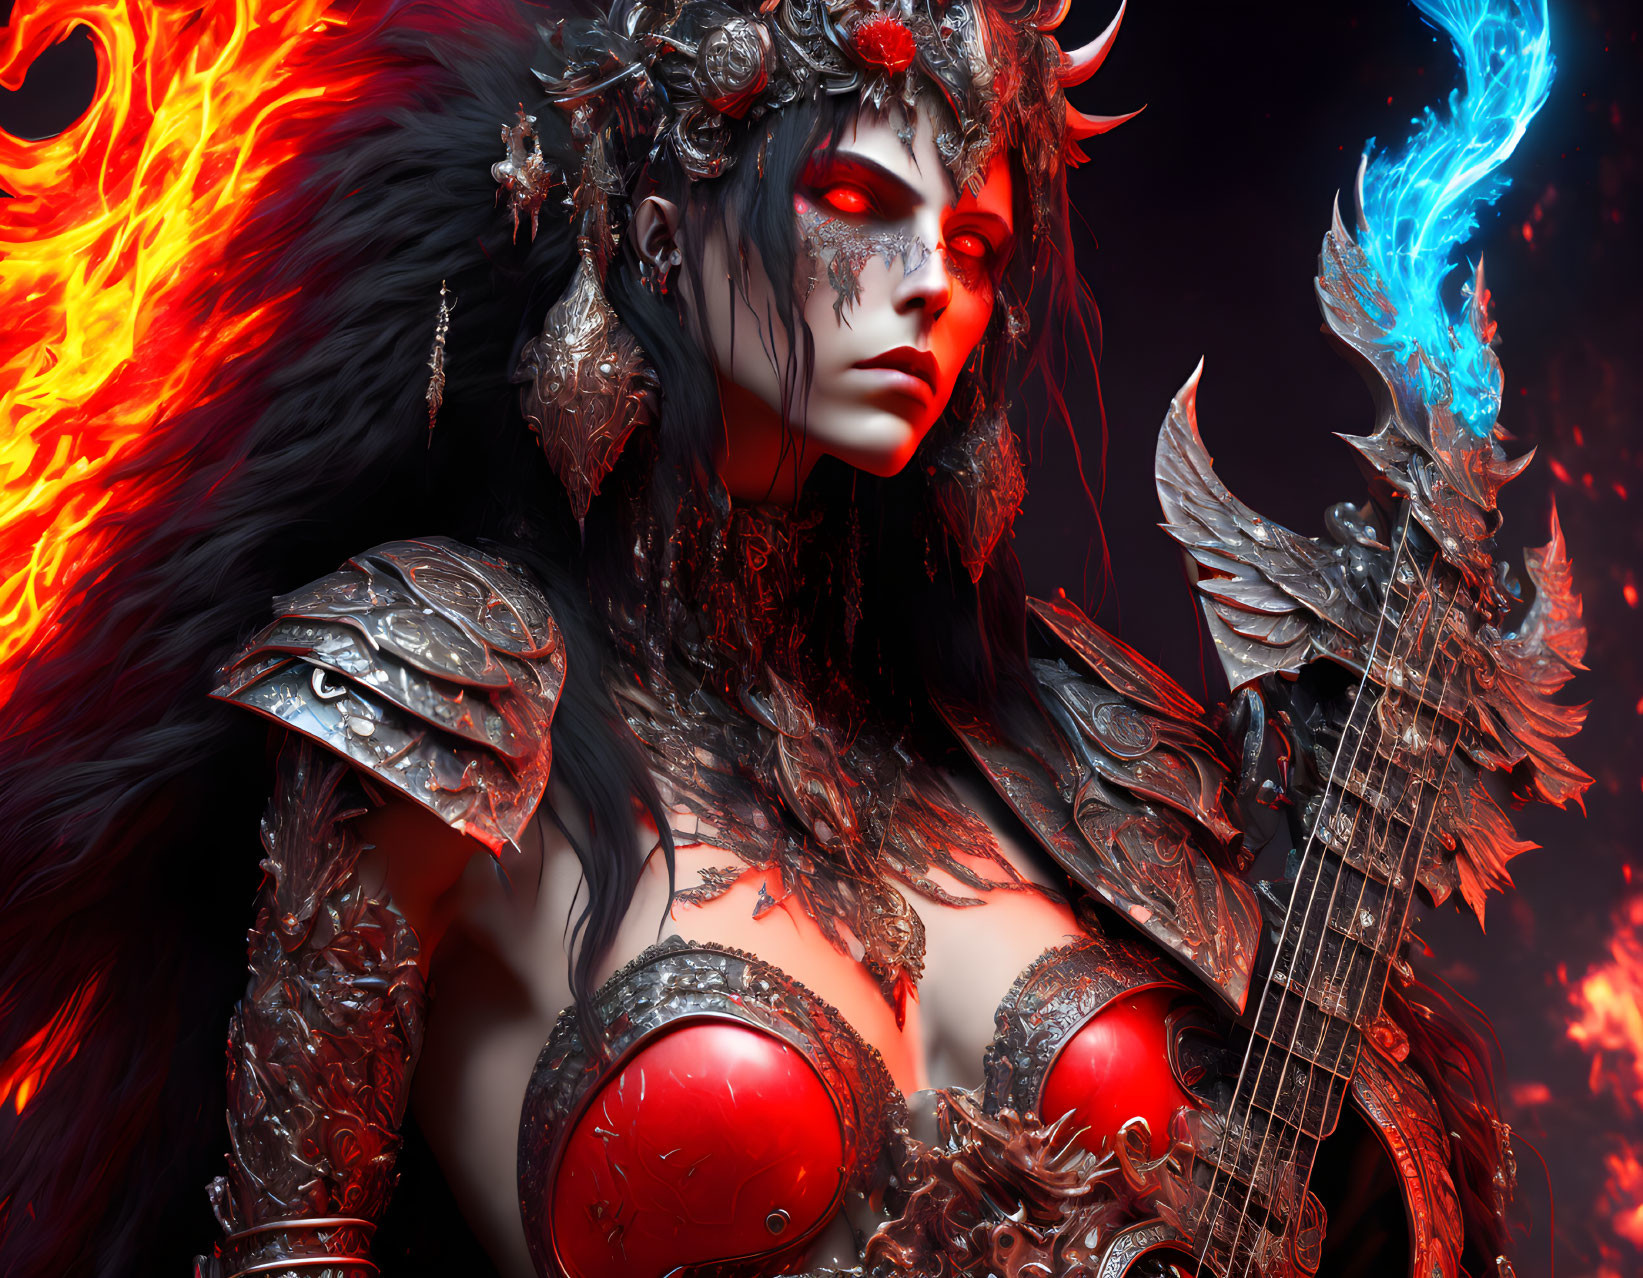 Female warrior with demonic features playing fiery guitar in ornate armor amid flames and blue fire